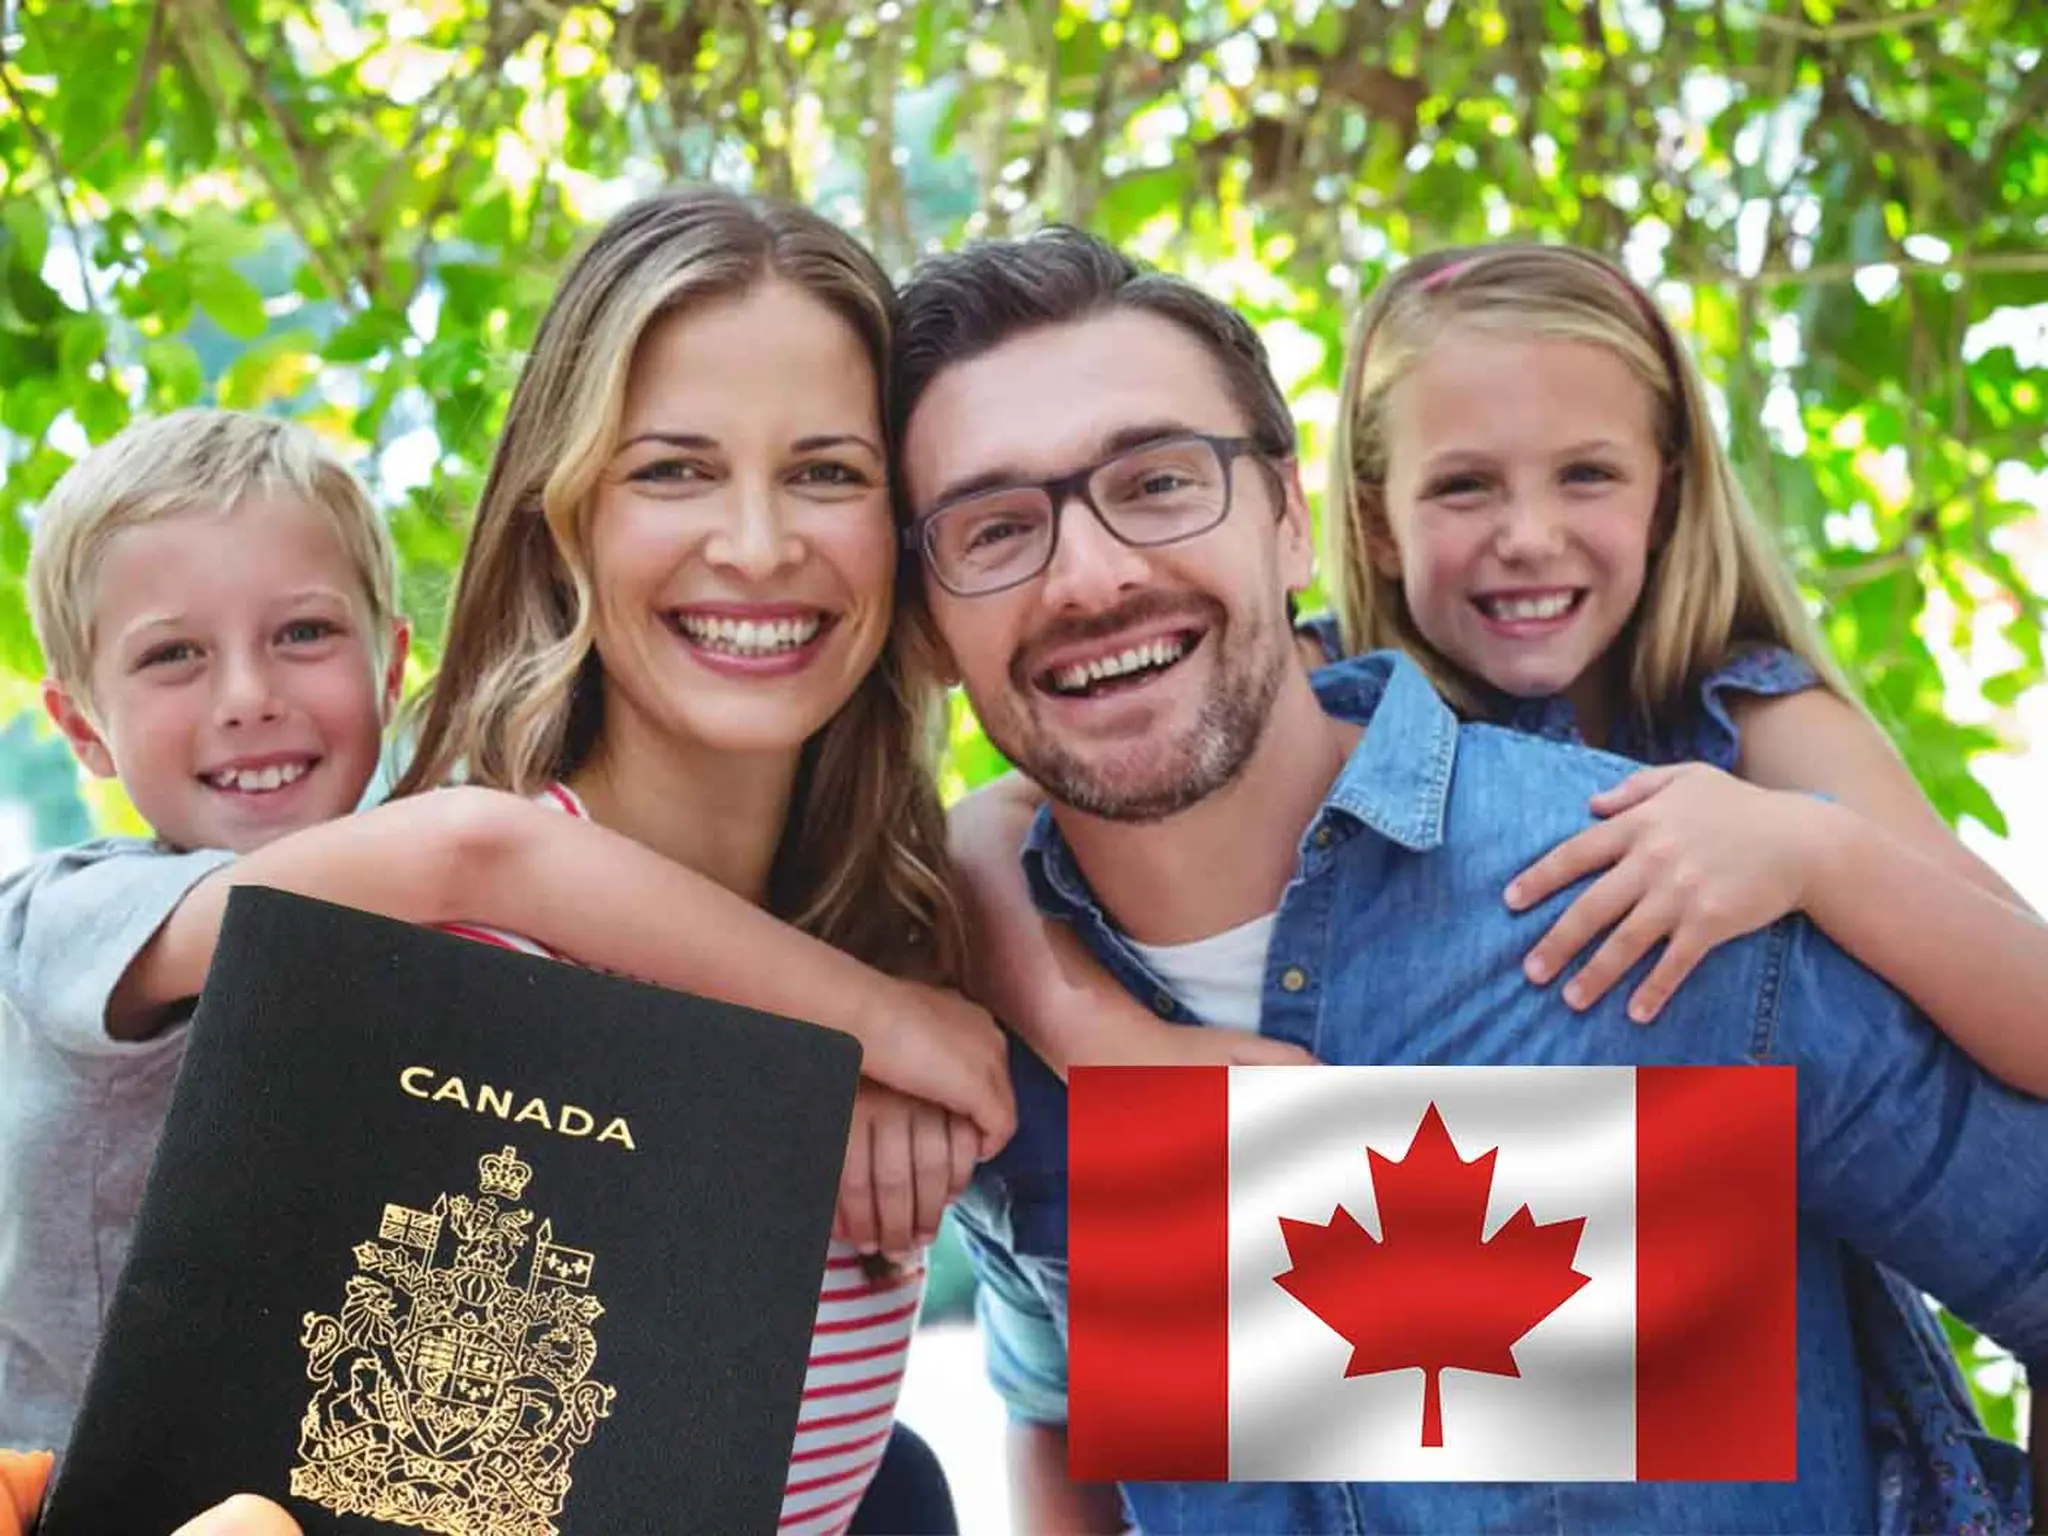 Conditions for Canadian citizenship after accepting more than 354,000 last year